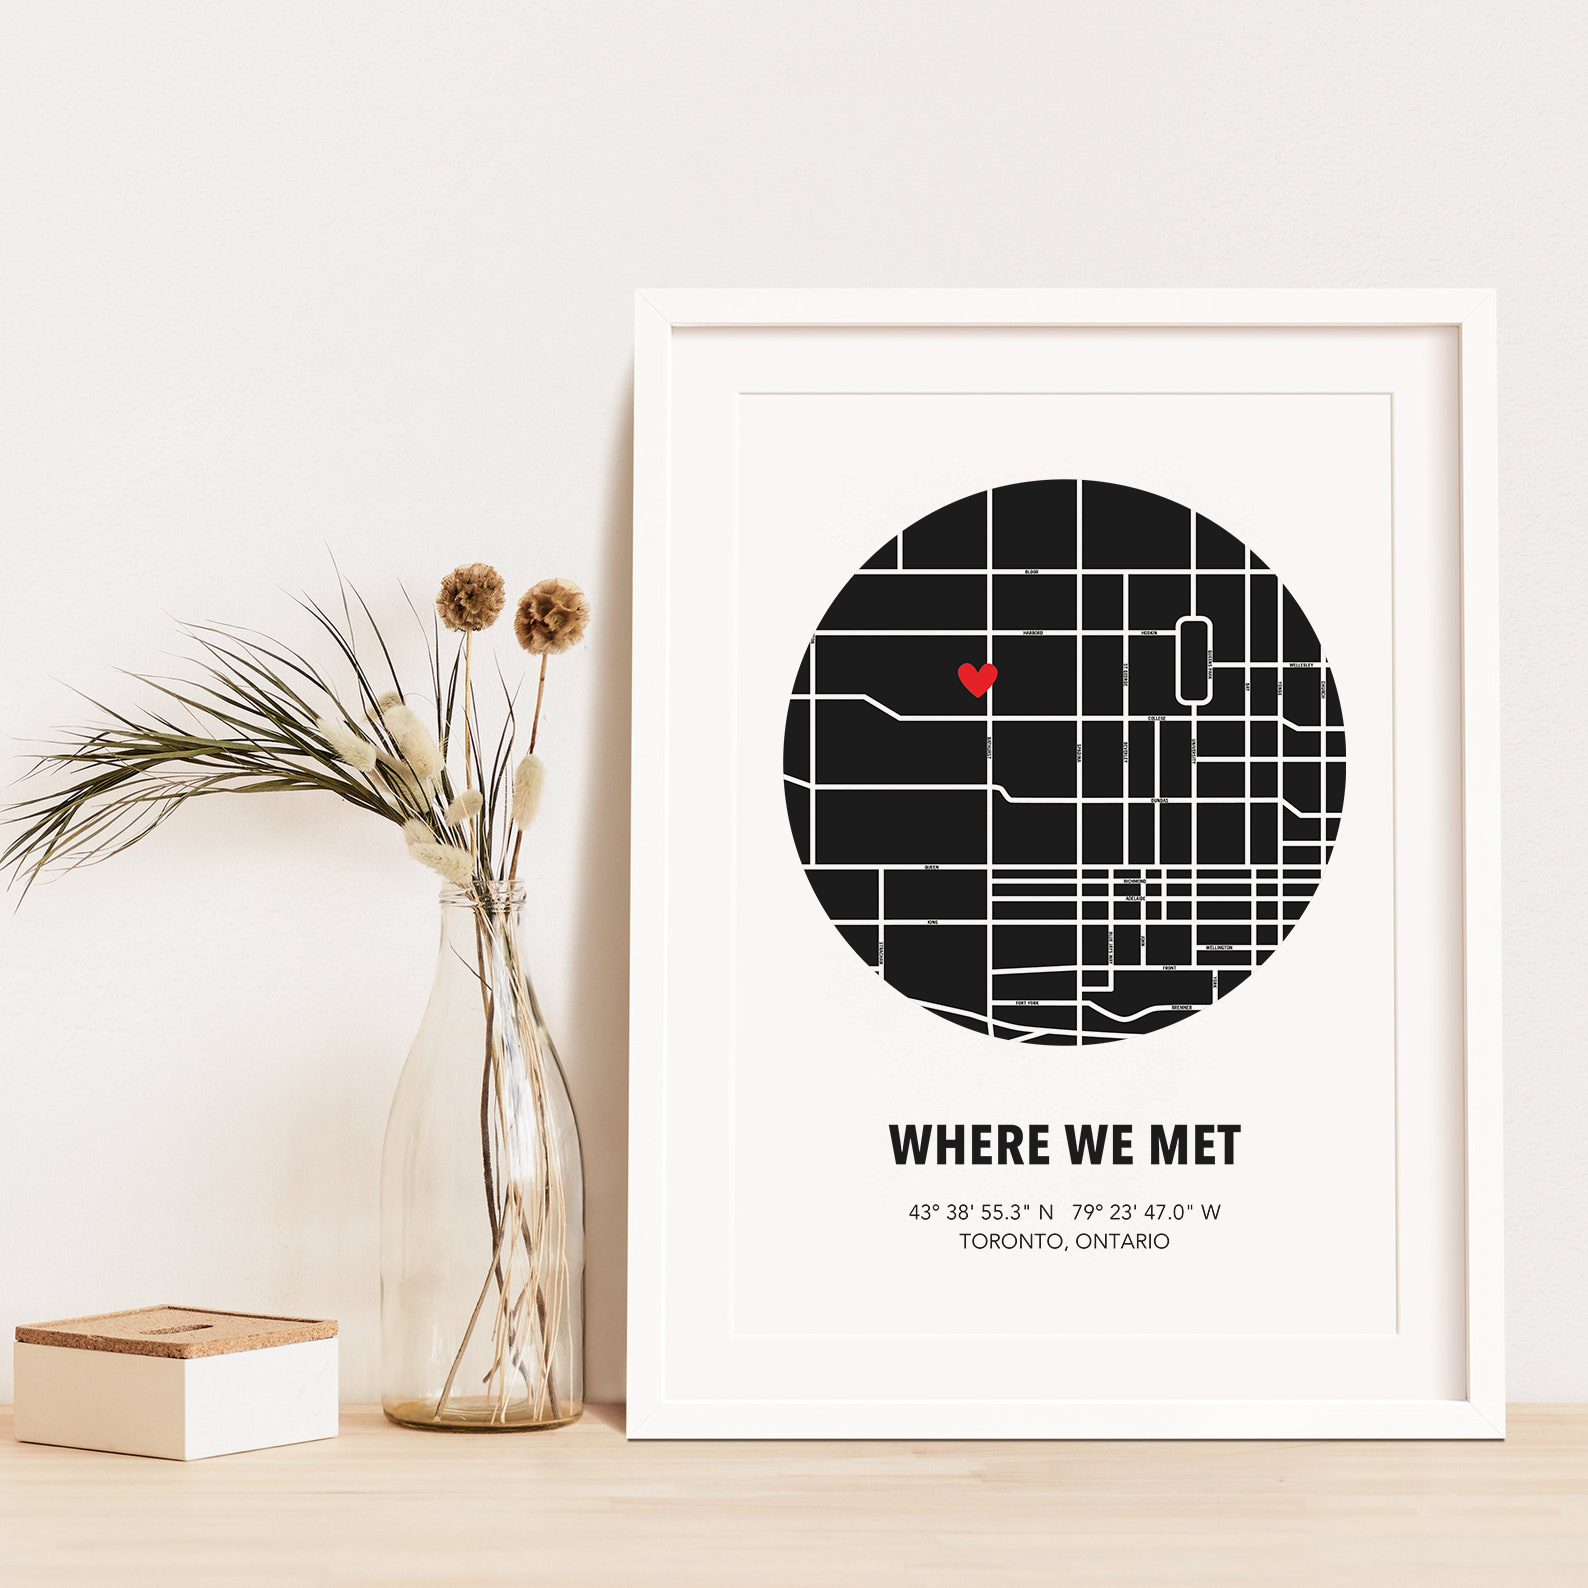 Image of map in a black circle with type below that says Where We Met and coordinates on the next line. Frame is placed on a wood surface beside a decorative plant in a clear bottle. 